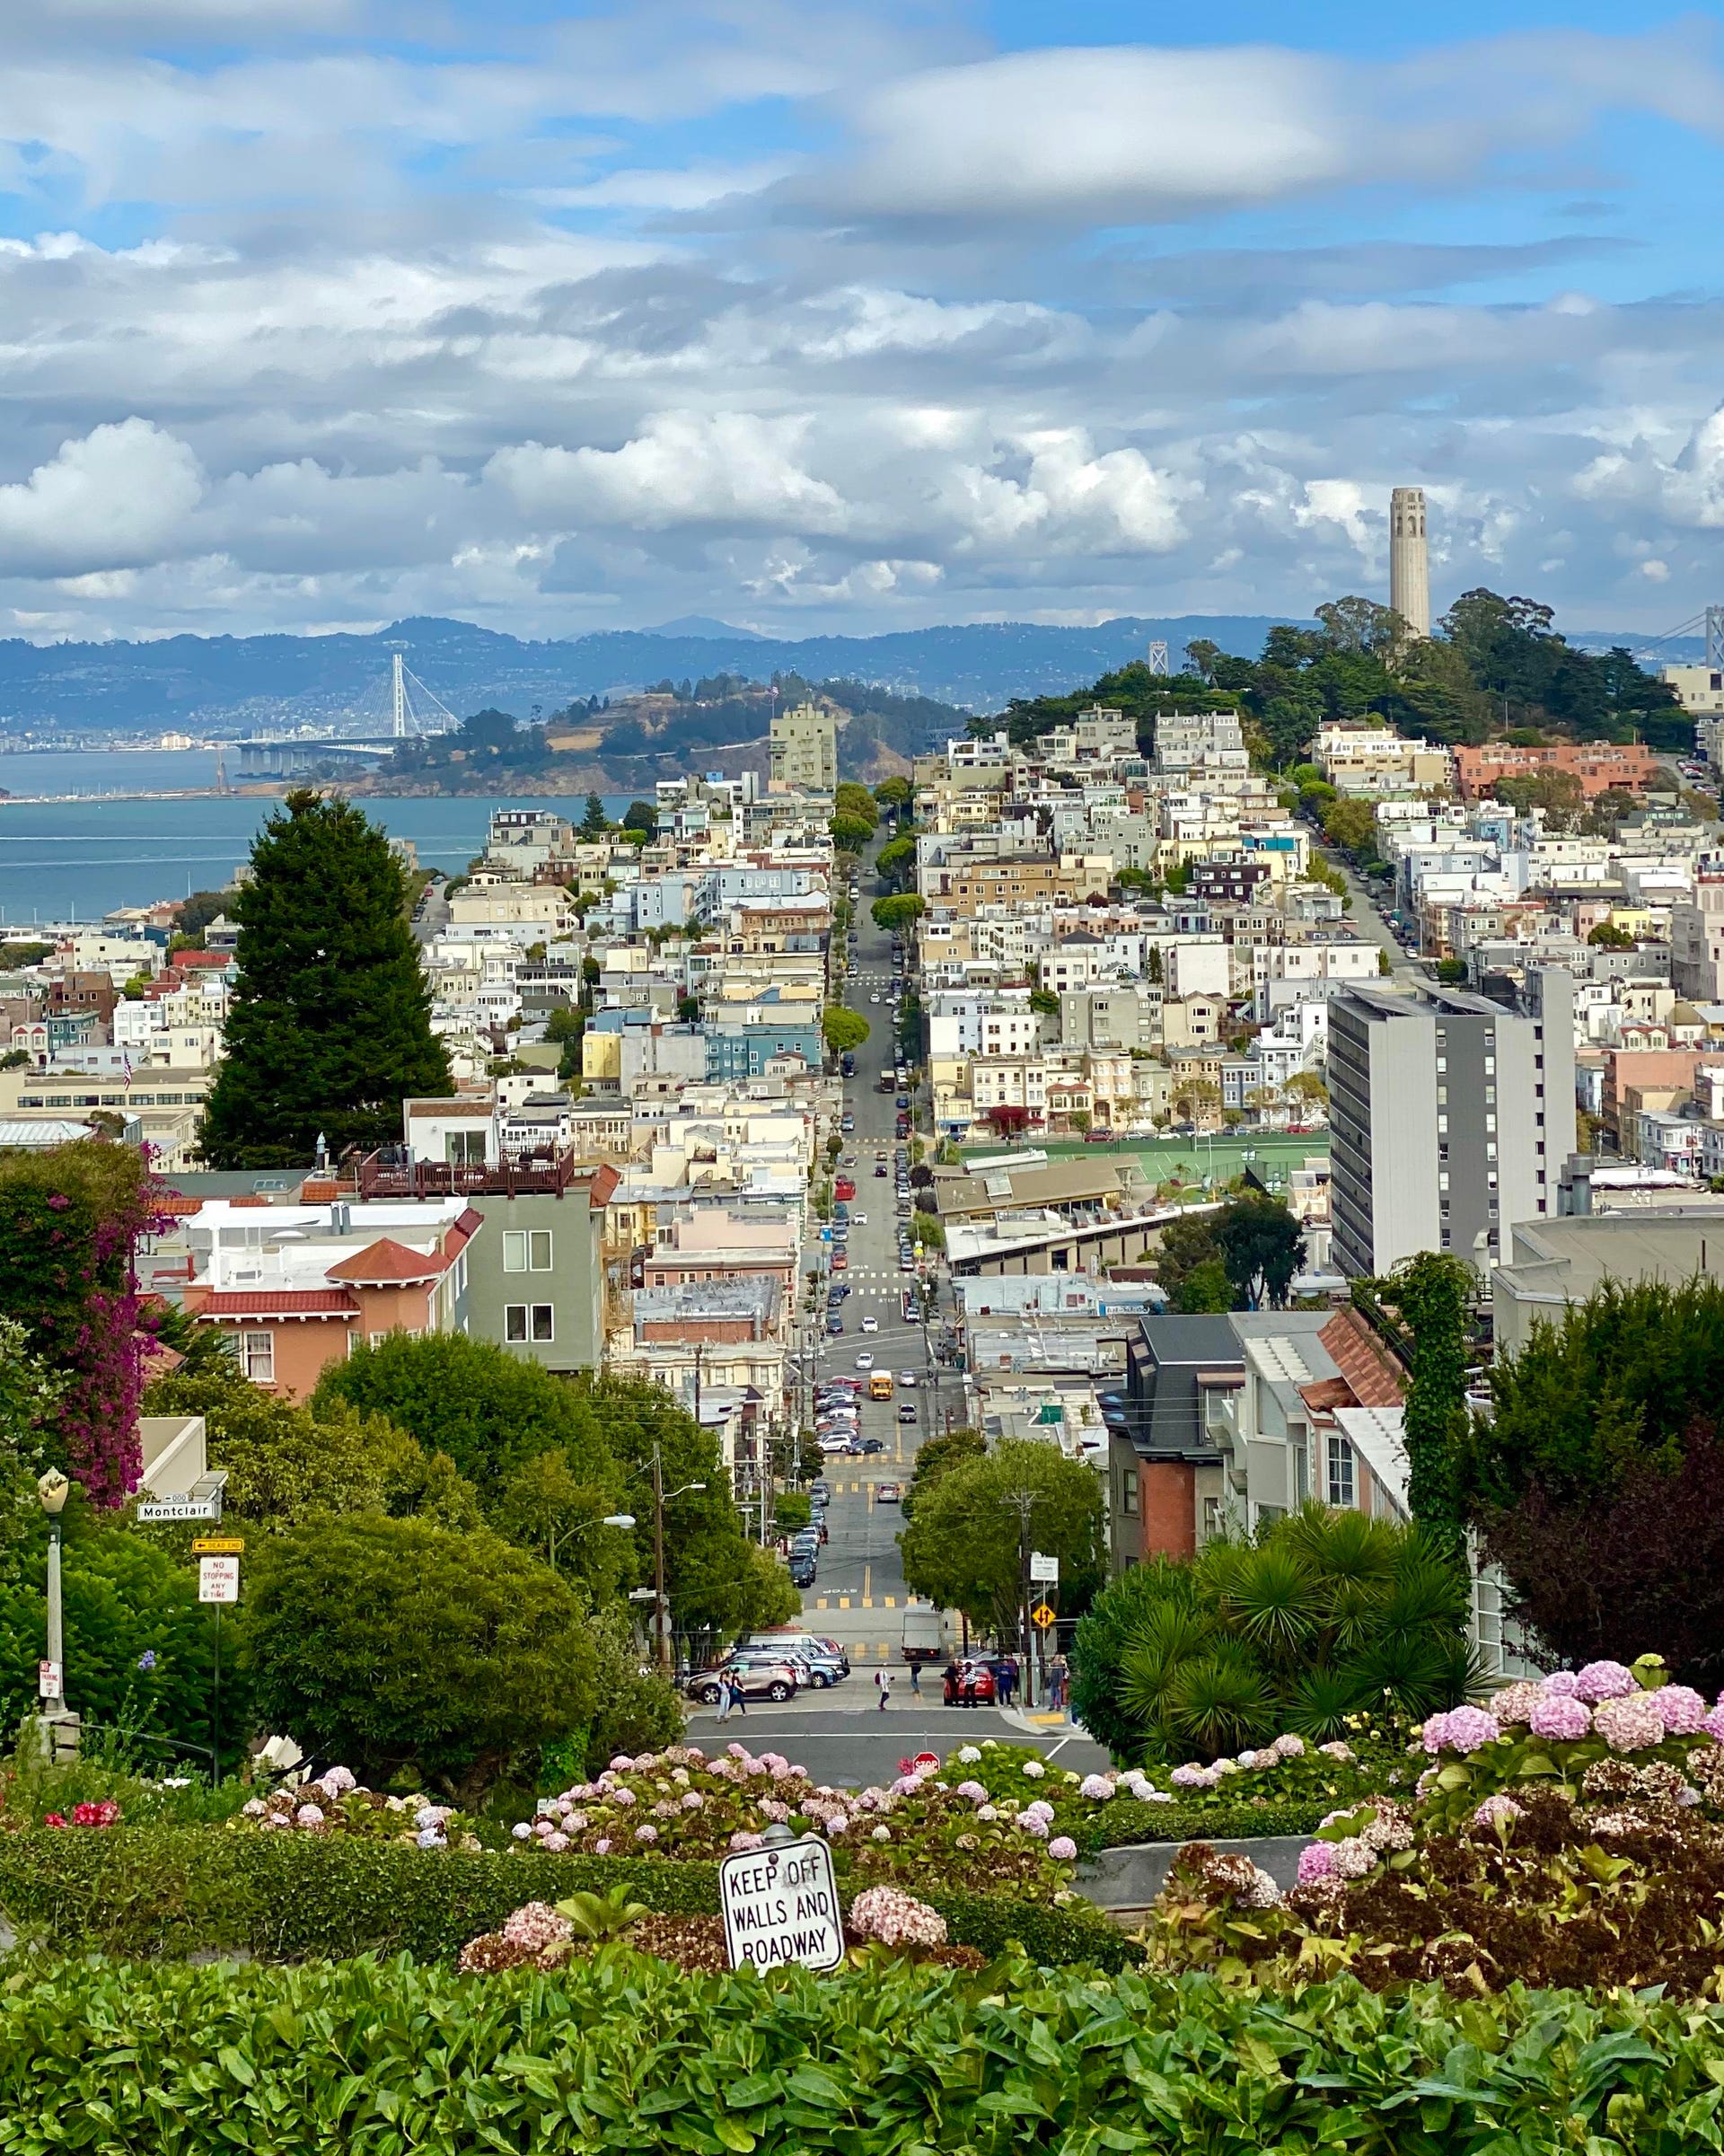 Lombard Street stretches out to the horizon, with the Bay Bridge and Oakland on the left, and Coit Tower on the right.